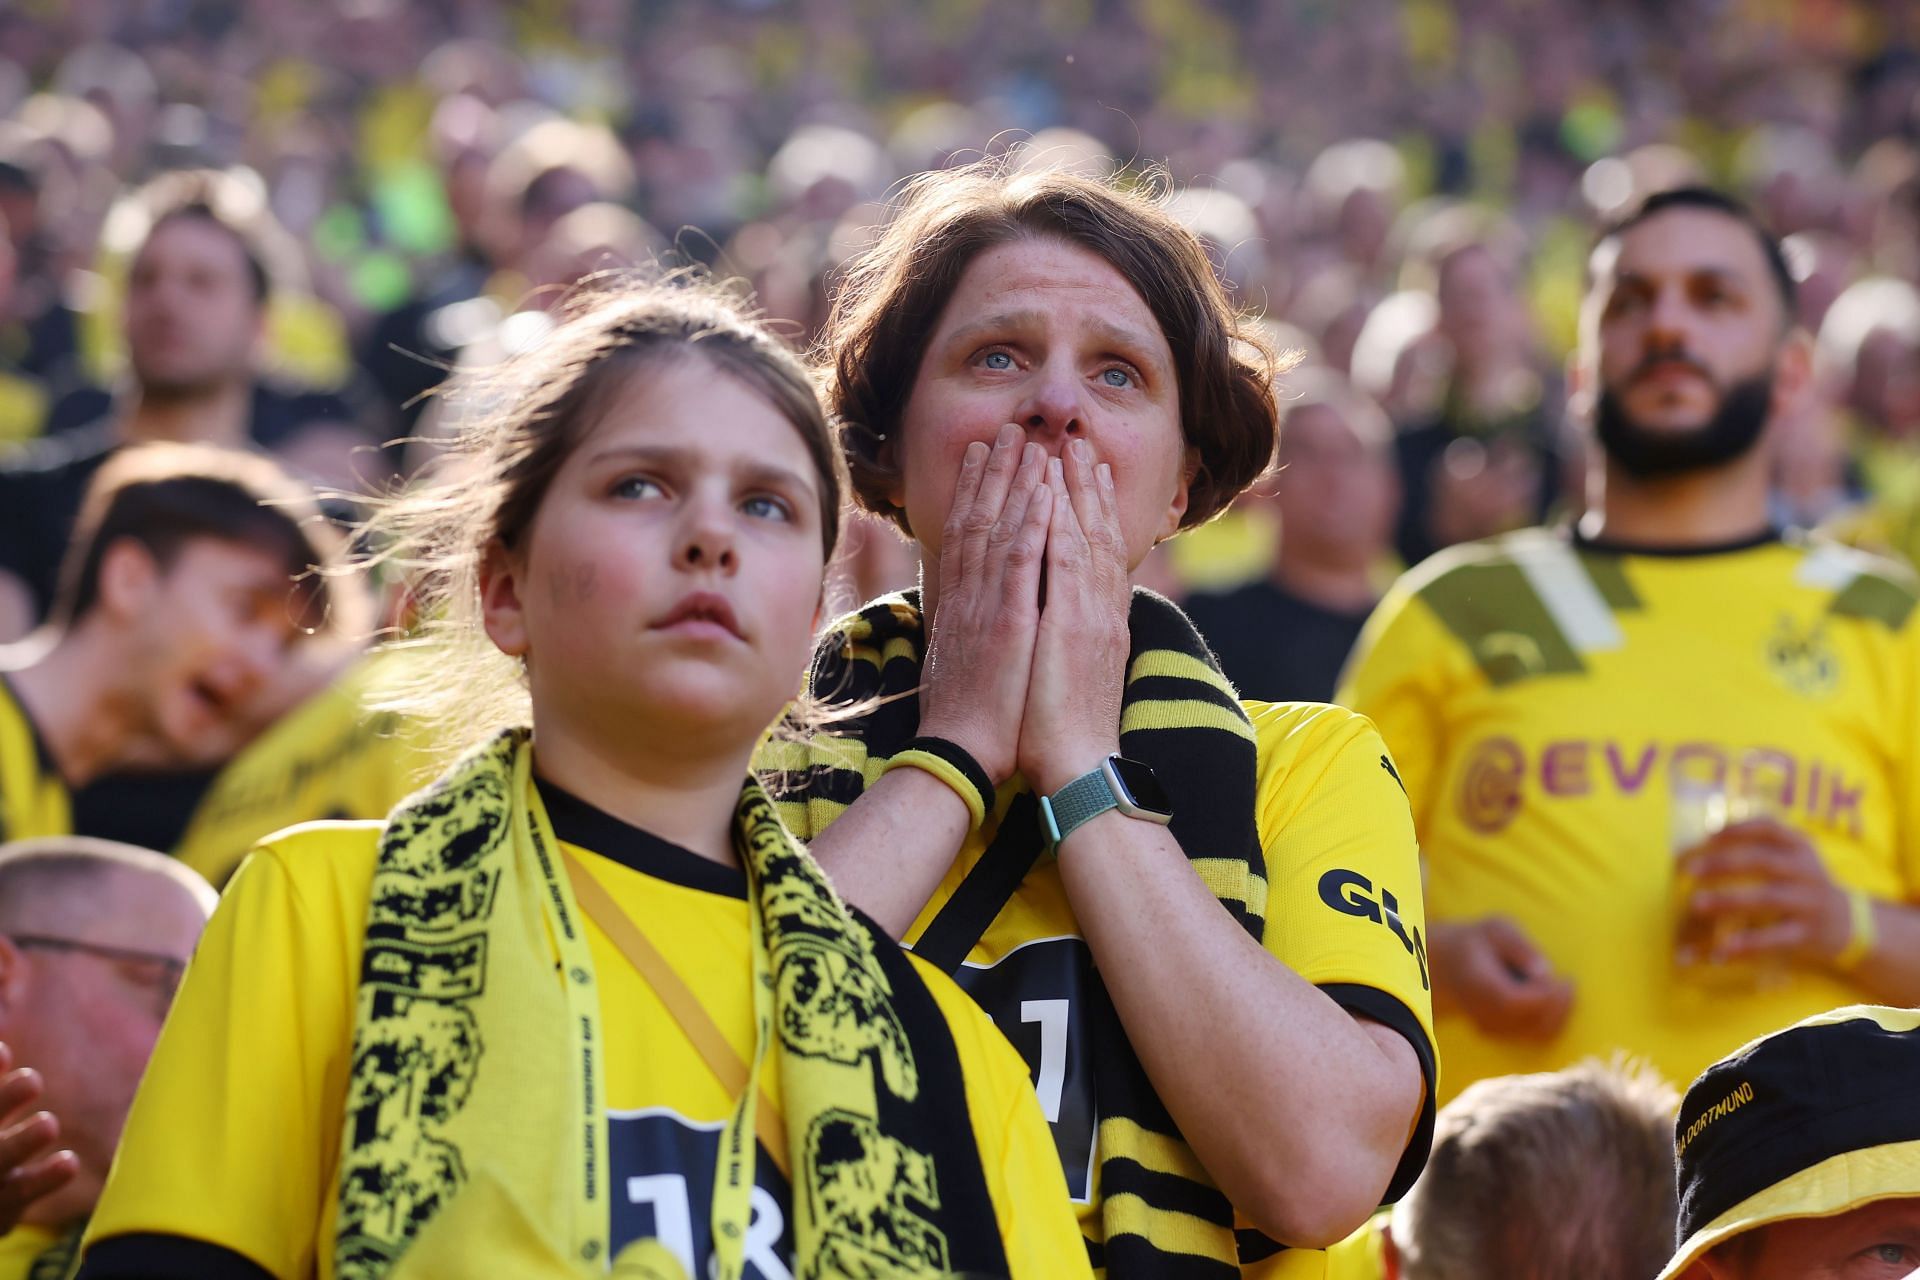 Borussia Dortmund fans in shock after their team failed to win against Mainz